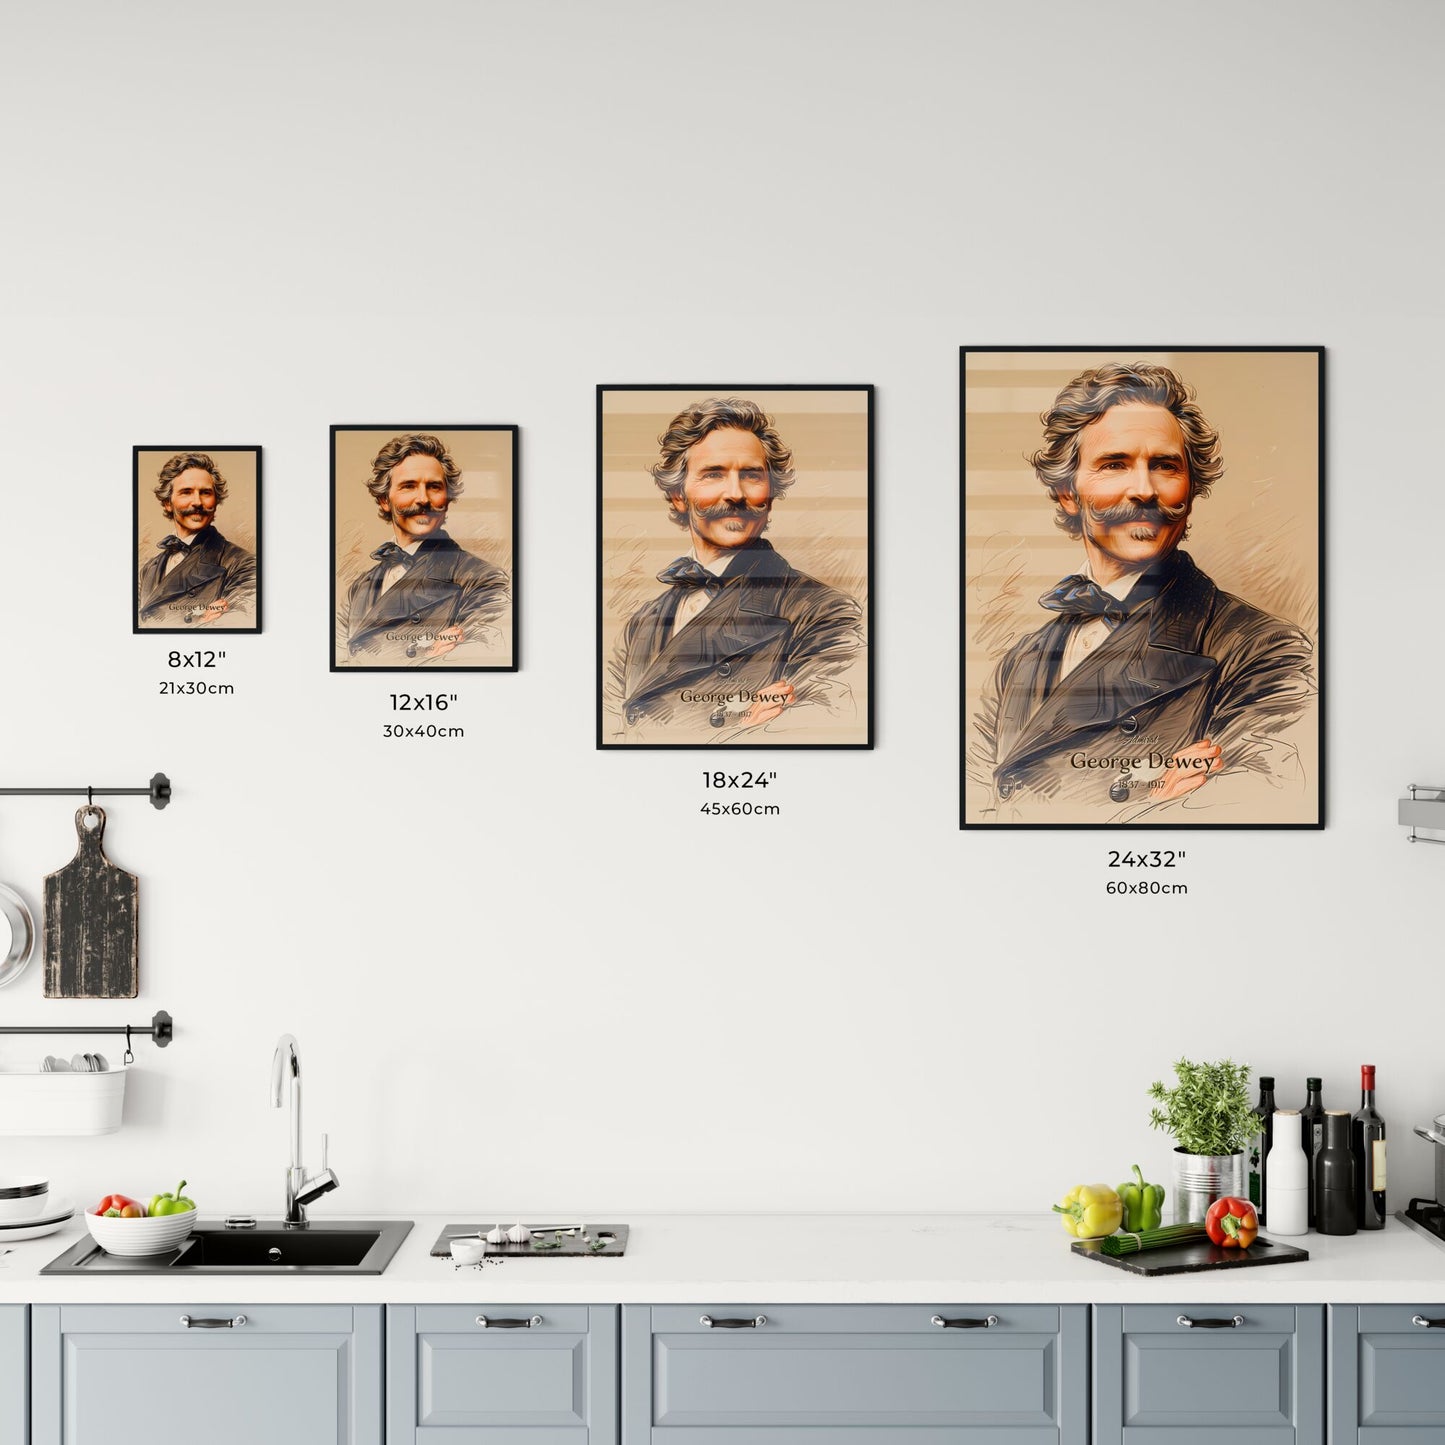 Admiral, George Dewey, 1837 - 1917, A Poster of a man with a mustache and a bow tie Default Title